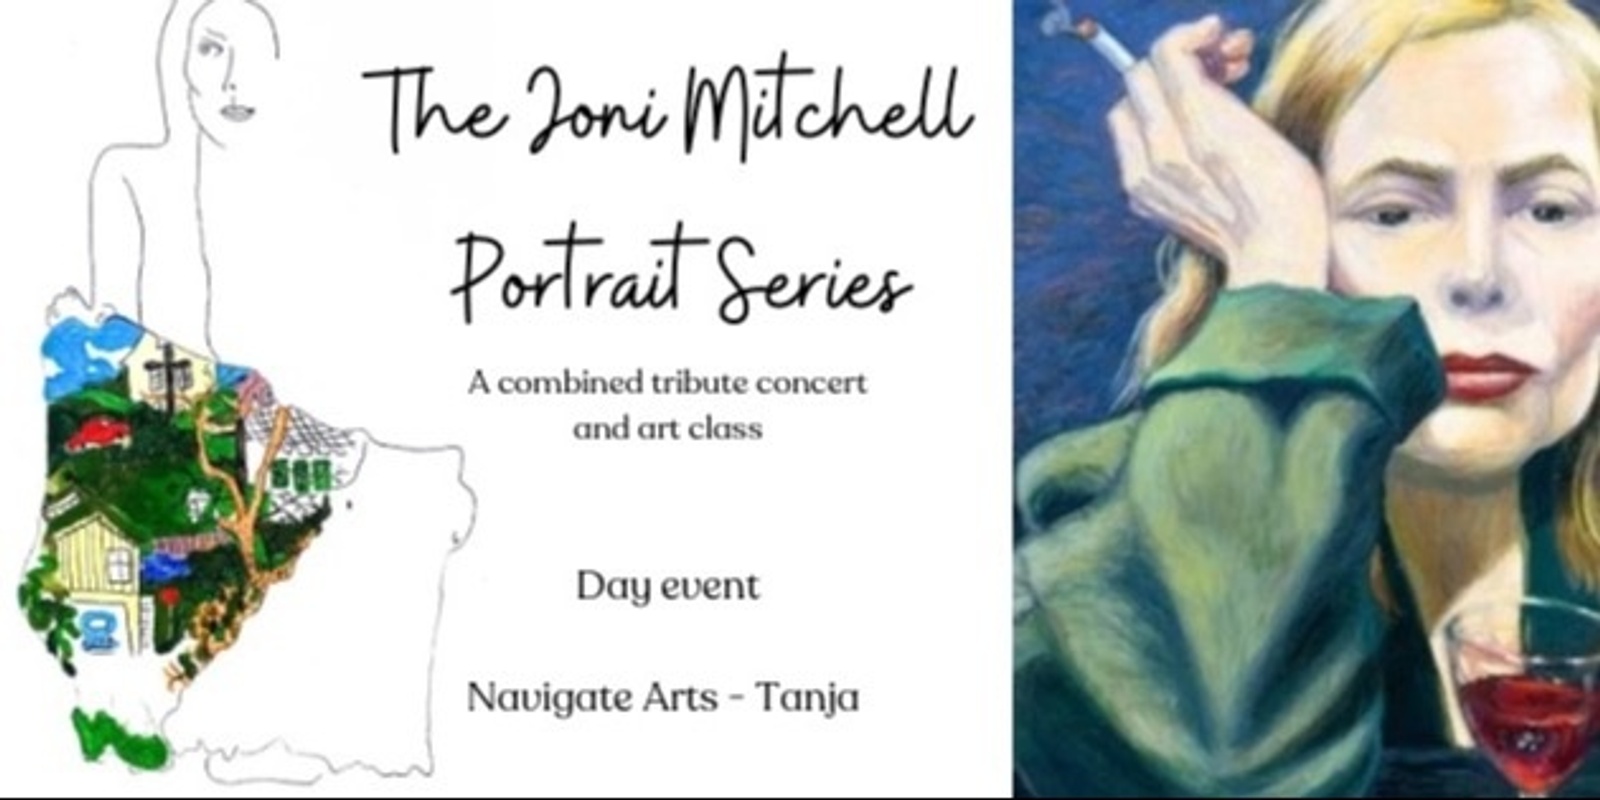 Banner image for The Joni Mitchell Portrait Series - Day event